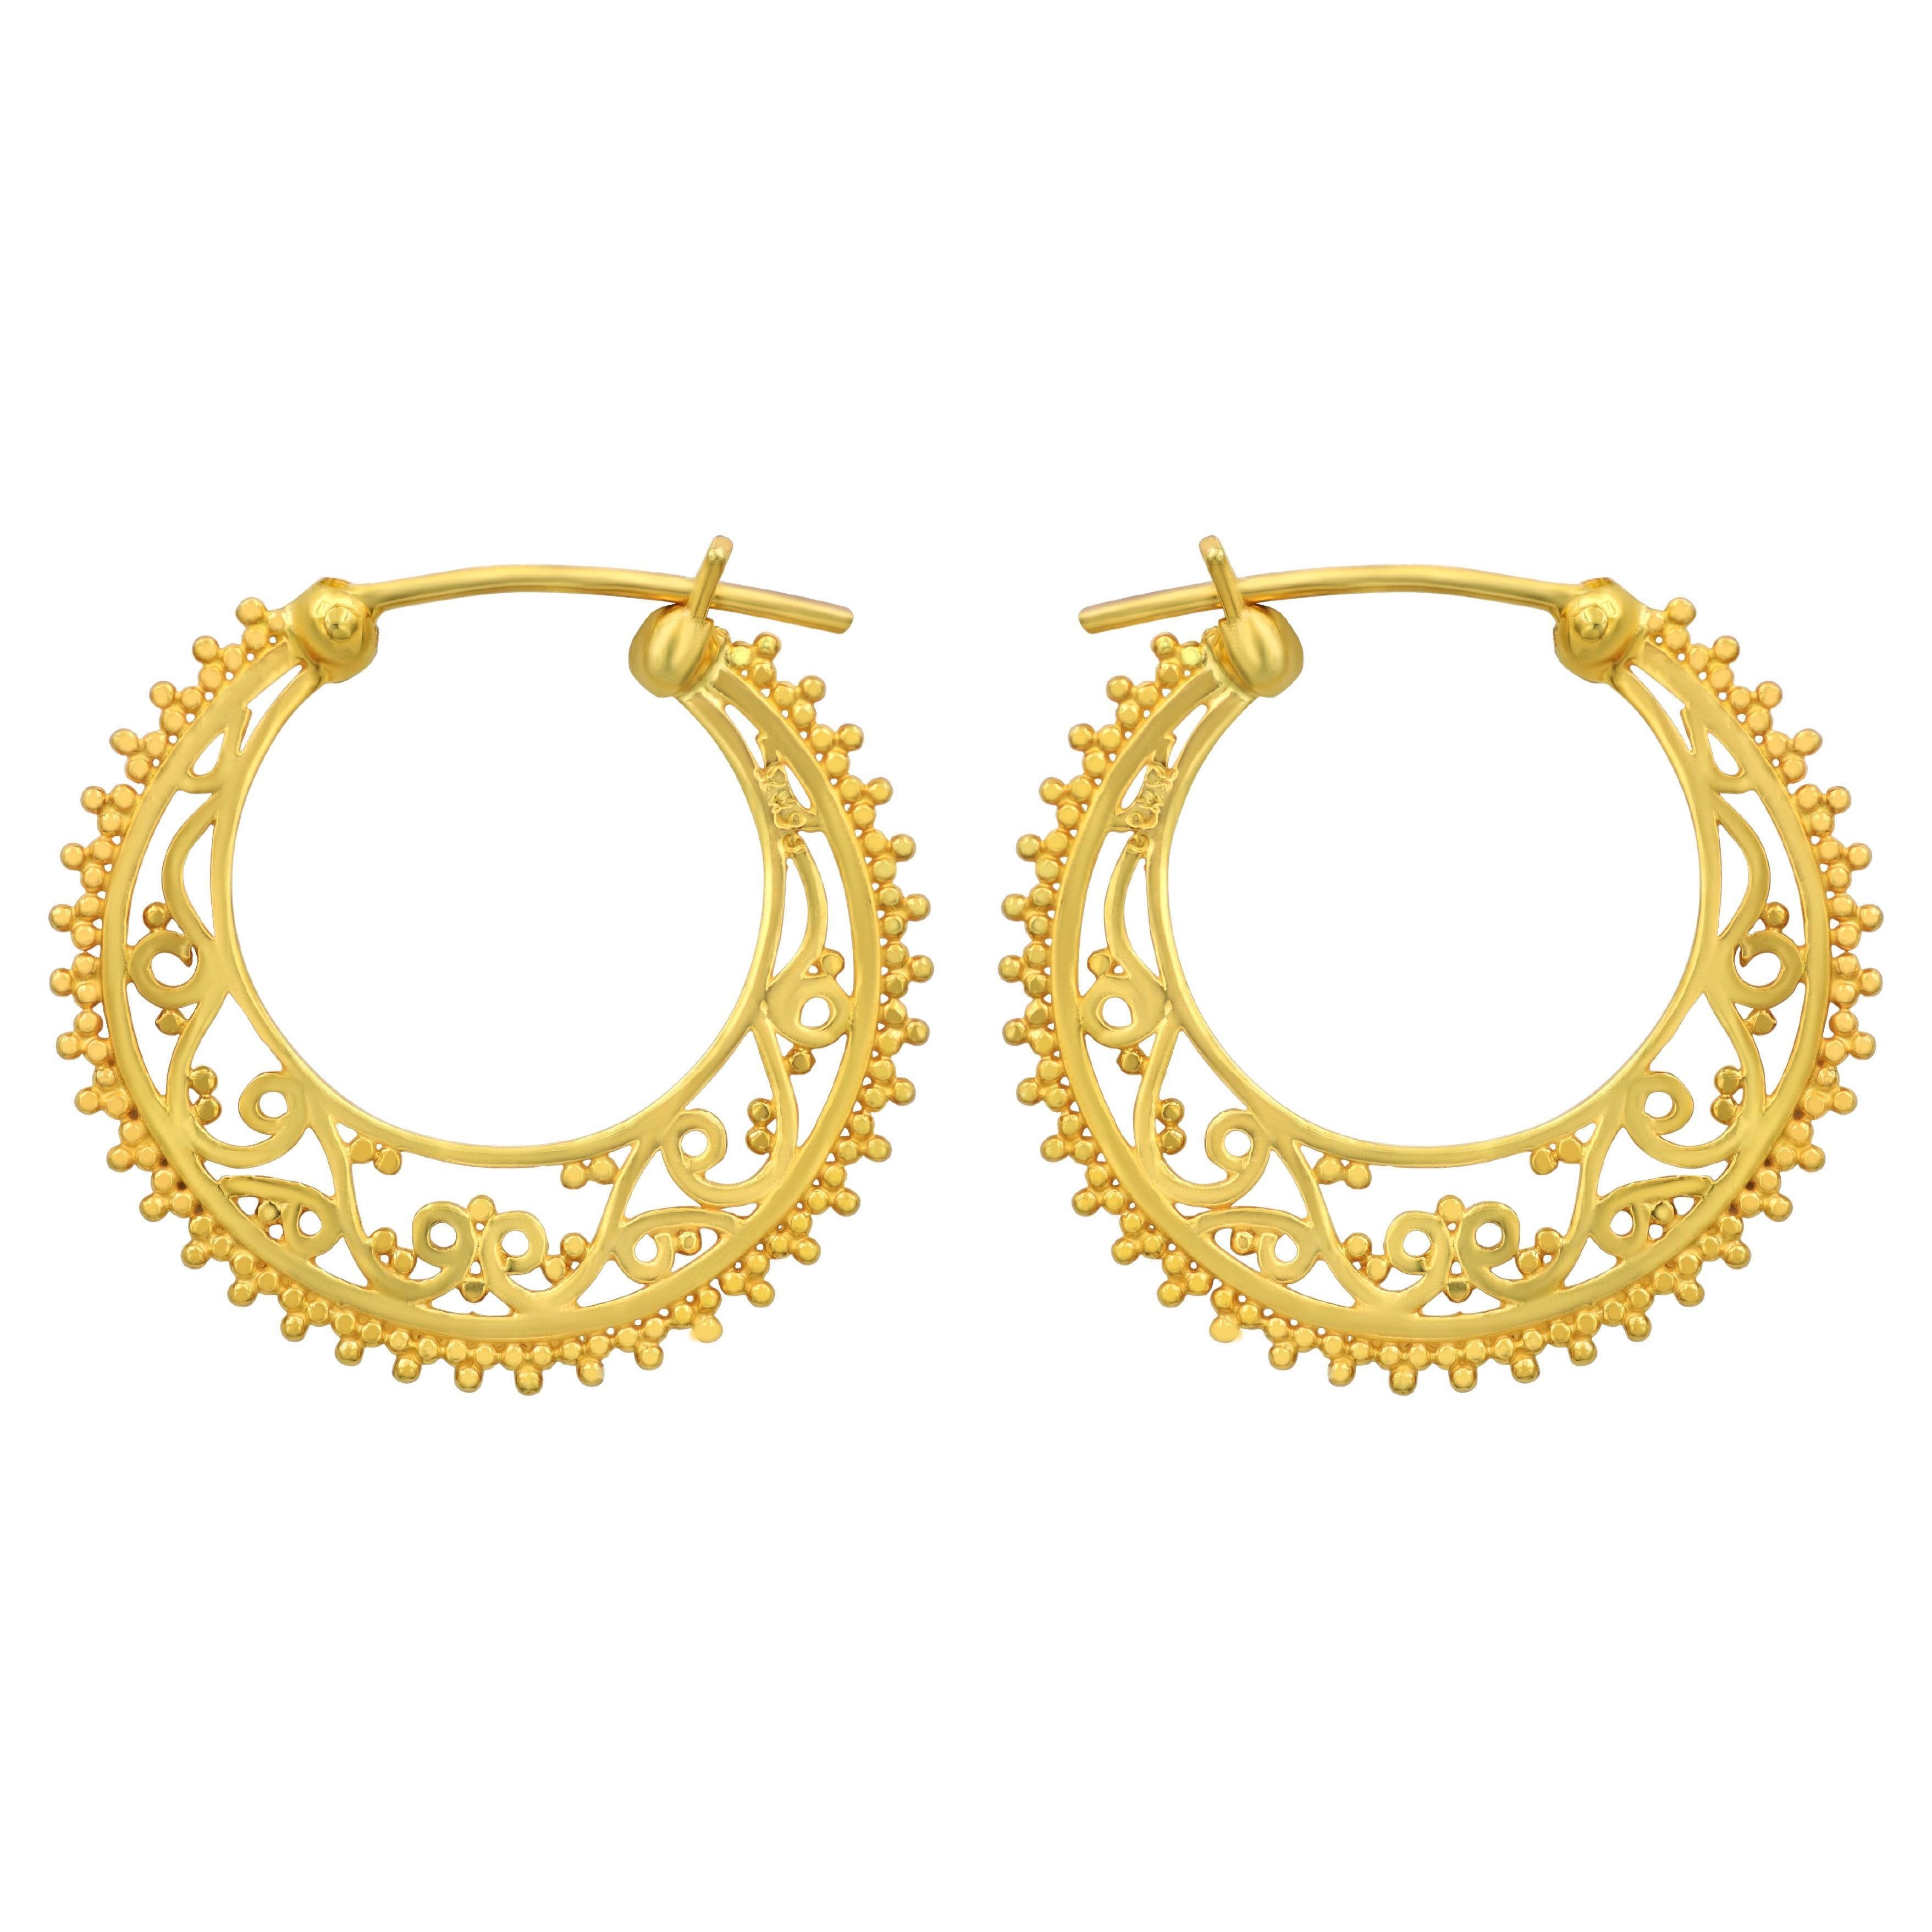 Textured Square Pave Diamond Earring Studs in 14k Gold - Filigree